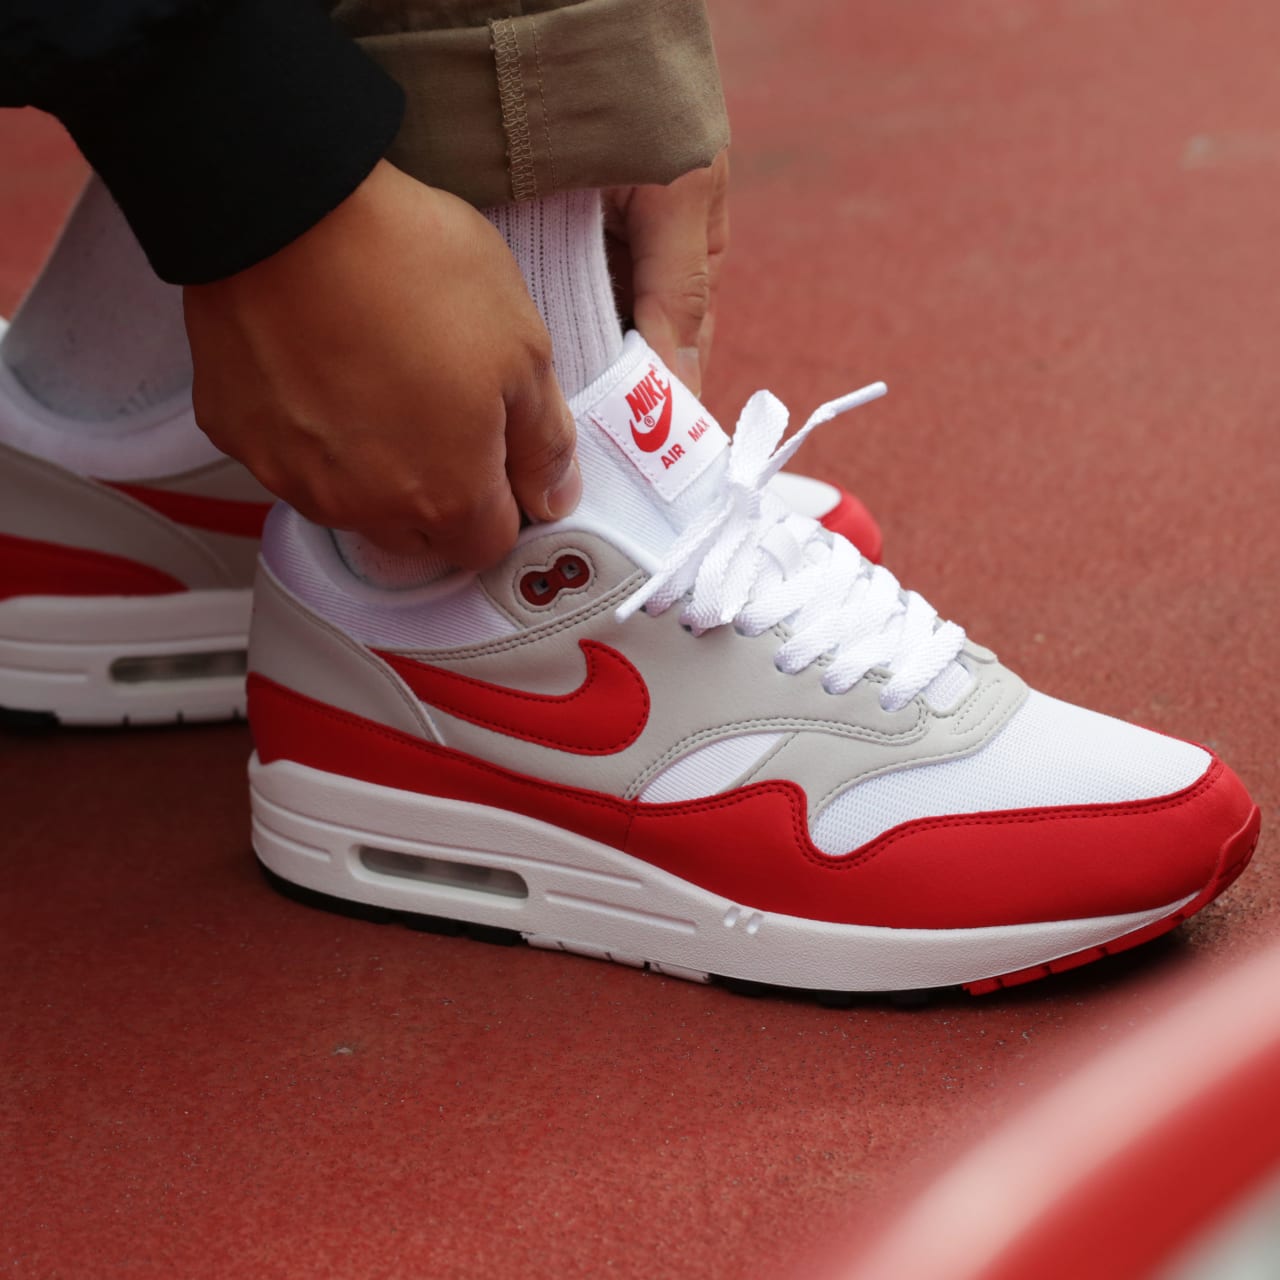 nike air max 1 anniversary red and white